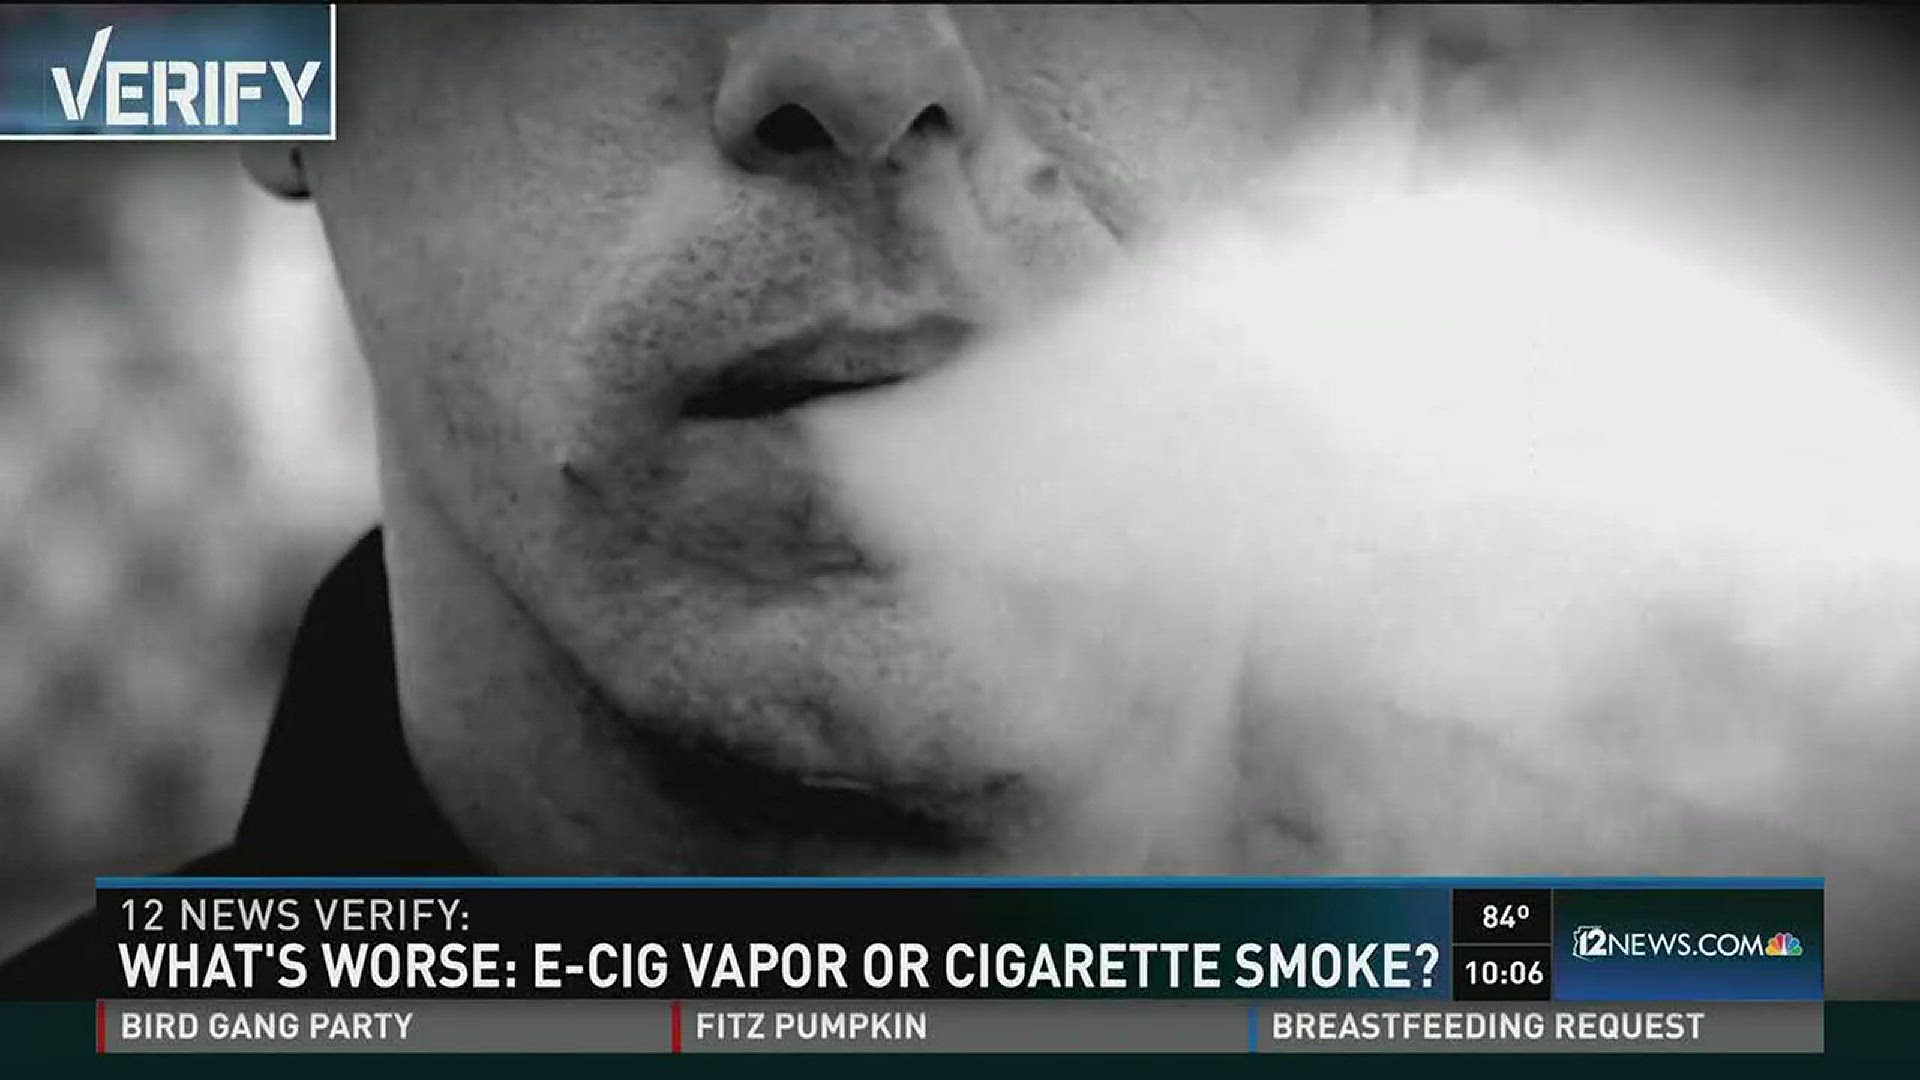 We asked the experts if e-cigarette vapor is more dangerous than second-hand cigarette smoke.